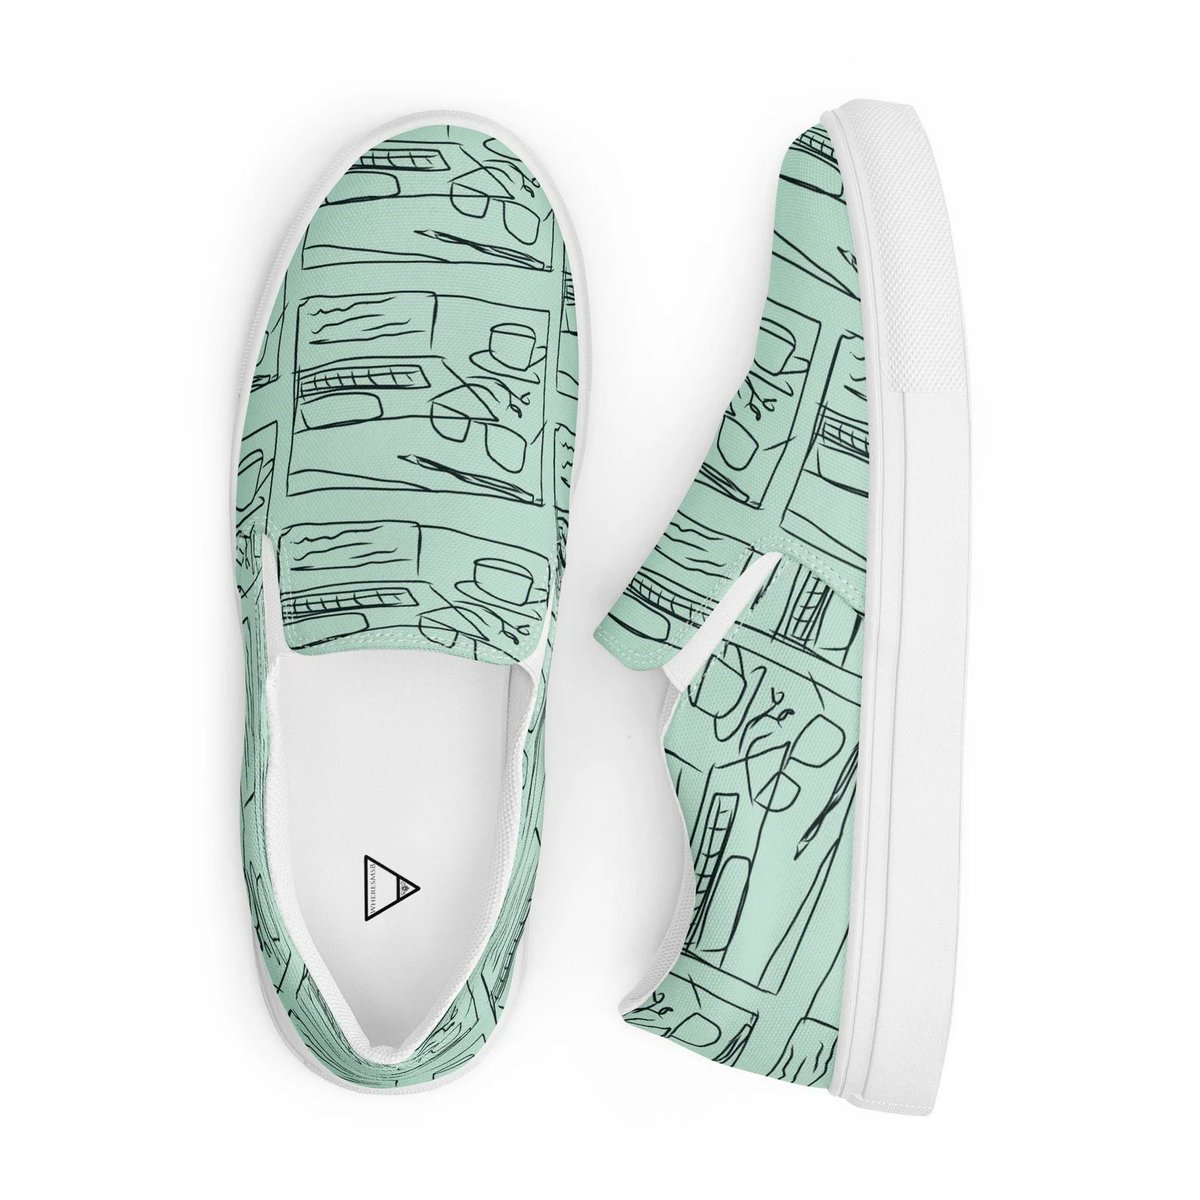 Step Into A New Season With Our Slip-On Shoes! 🐝 Item: Write And Sip, Slip-On Shoes By @shop_wheresmsb Creator: @wheresmsb Online Store: etsy.com/shop/WheresMsb 🐝 #WheresMsB #DoodleArt #Stationery #Artist #SmallBusiness #Writer #Shoes #SlipOns #LineArt